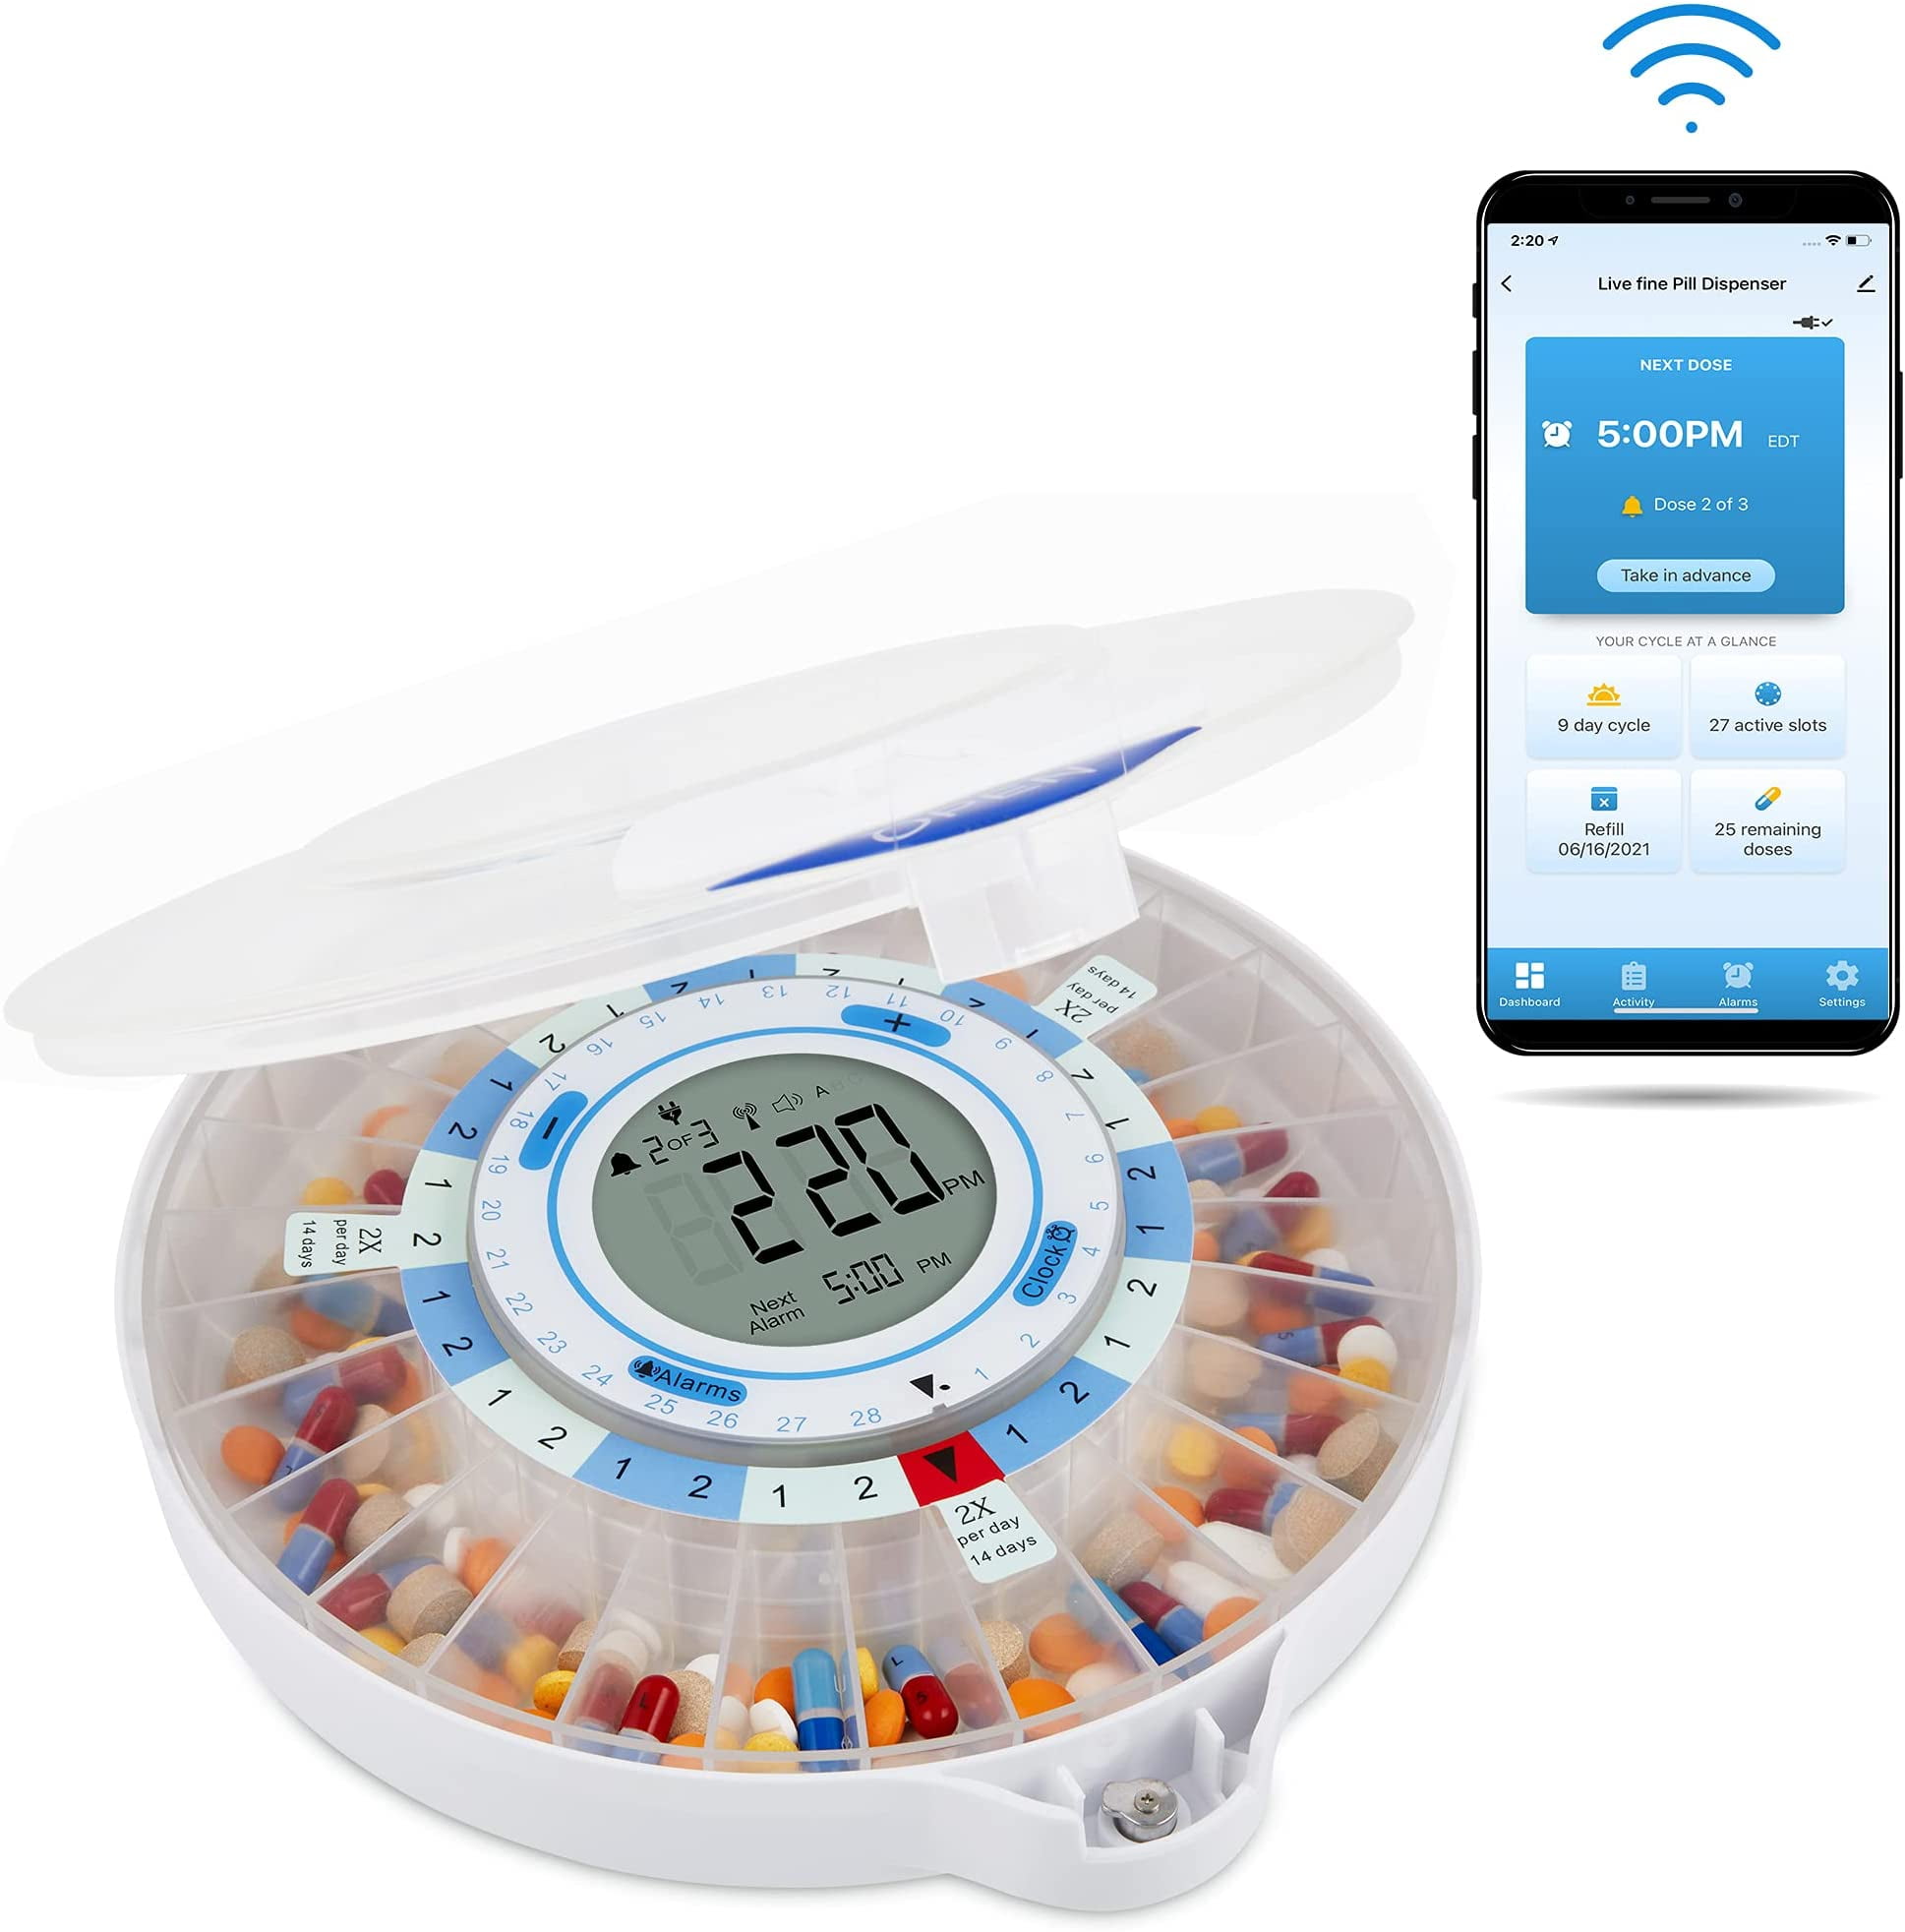 Smart medication dispensers for medication adherence